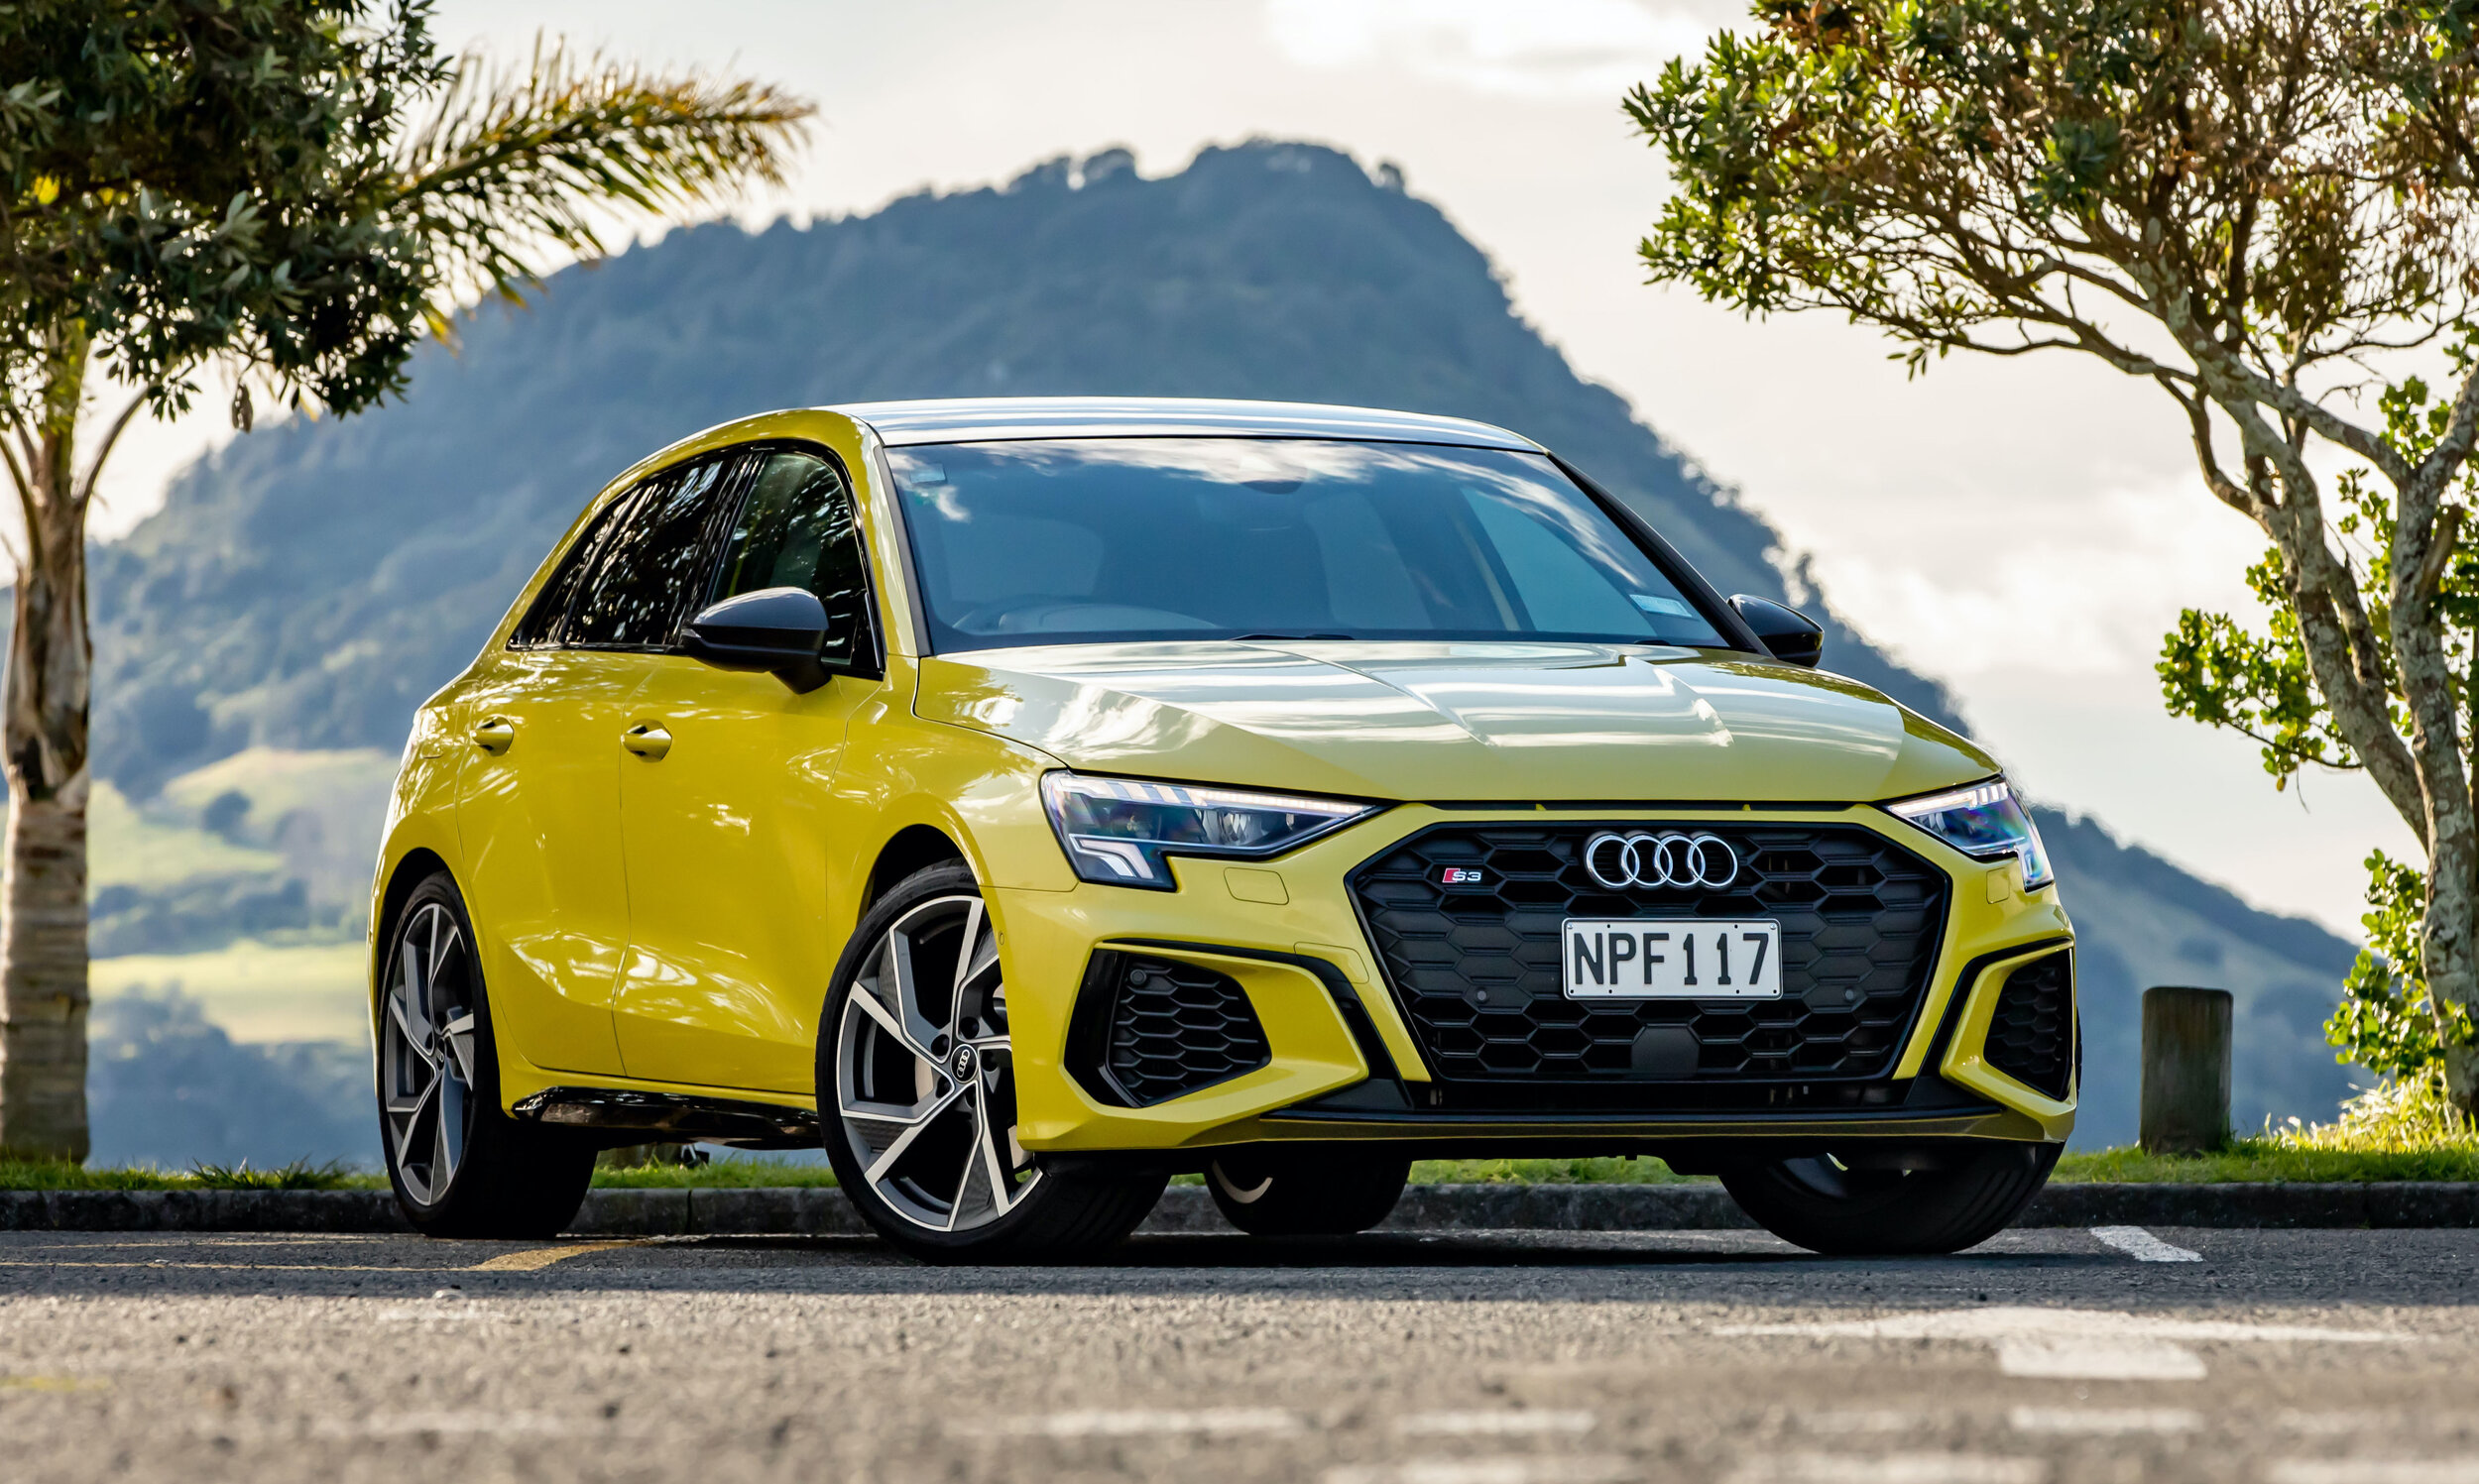 2022 Audi A3 And S3: Review And First Drive Impressions